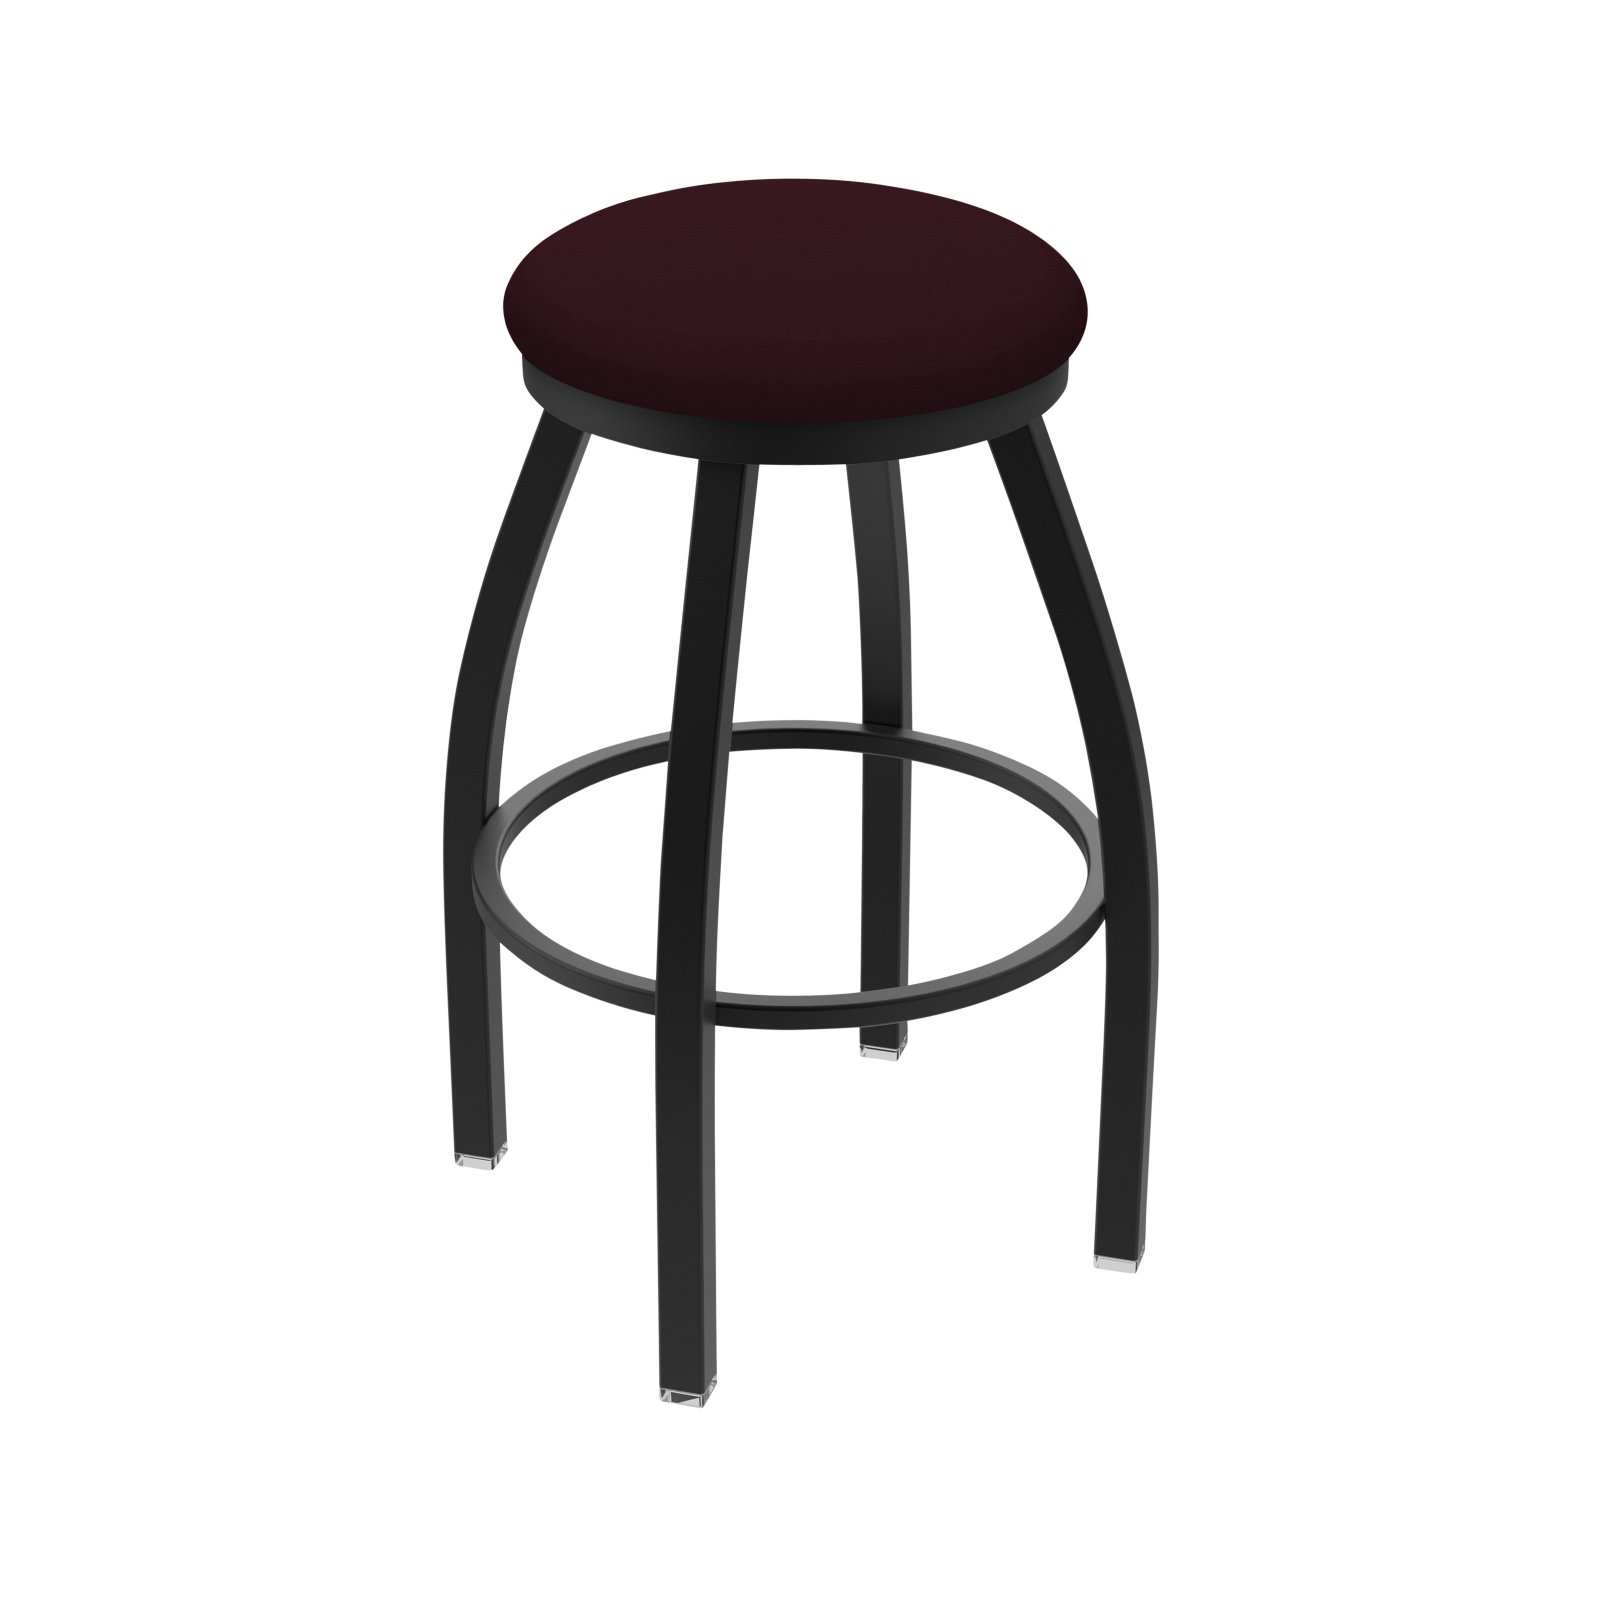 Holland Bar Stool Co XL 802 Misha 25 in. Faux Leather Swivel Counter Stool - image 1 of 2